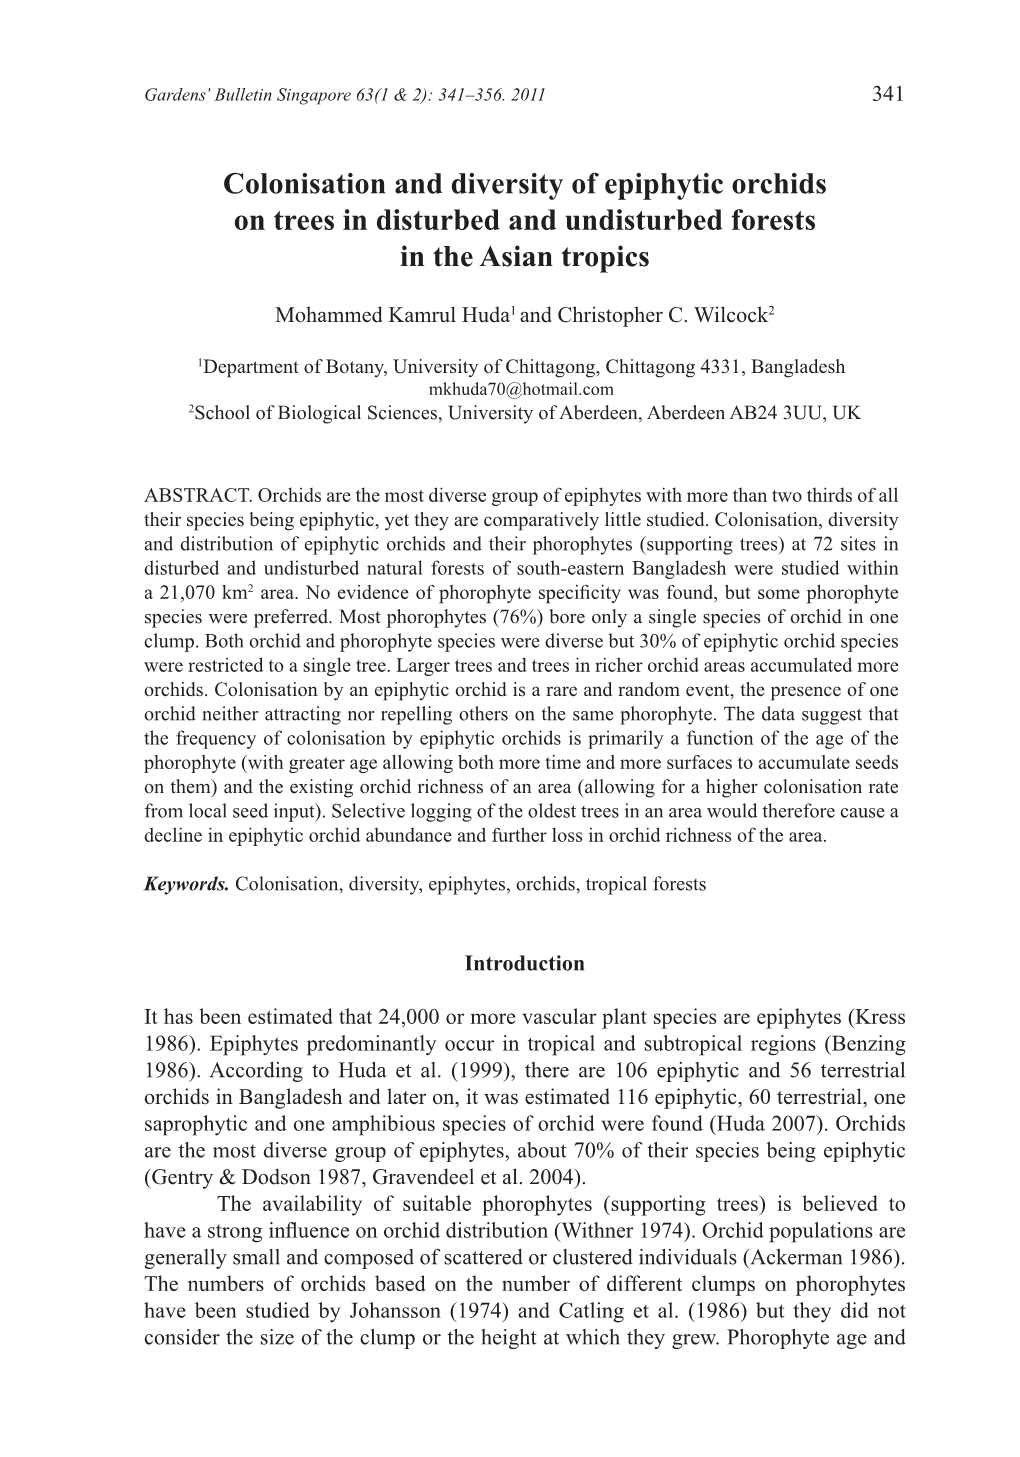 Colonisation and Diversity of Epiphytic Orchids on Trees in Disturbed and Undisturbed Forests in the Asian Tropics